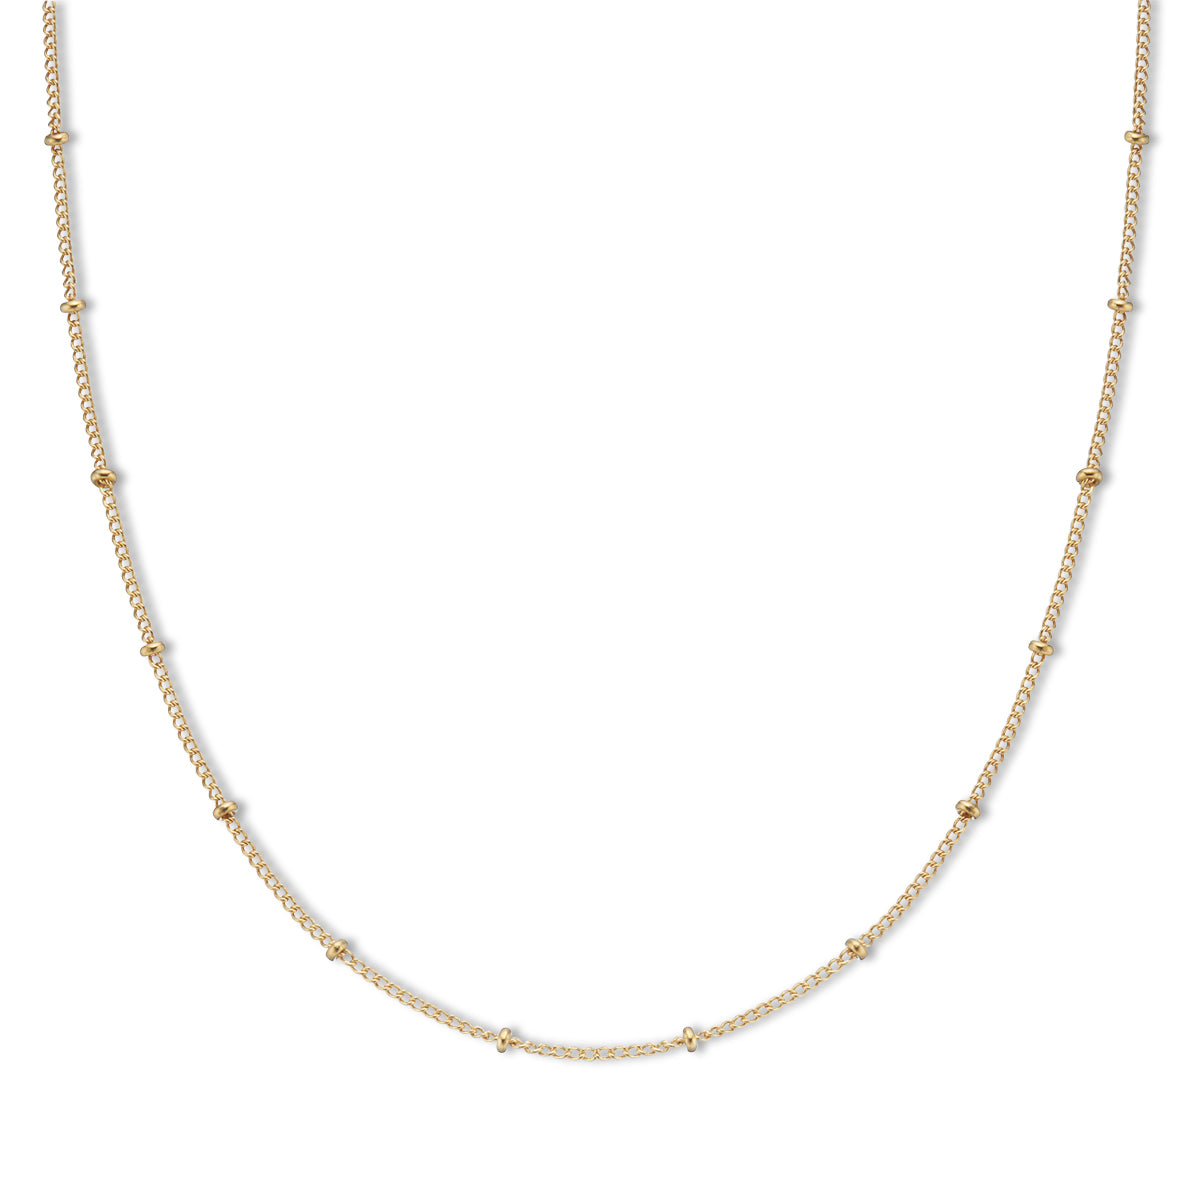 Soliel chain necklace 18k gold plated & adjustable